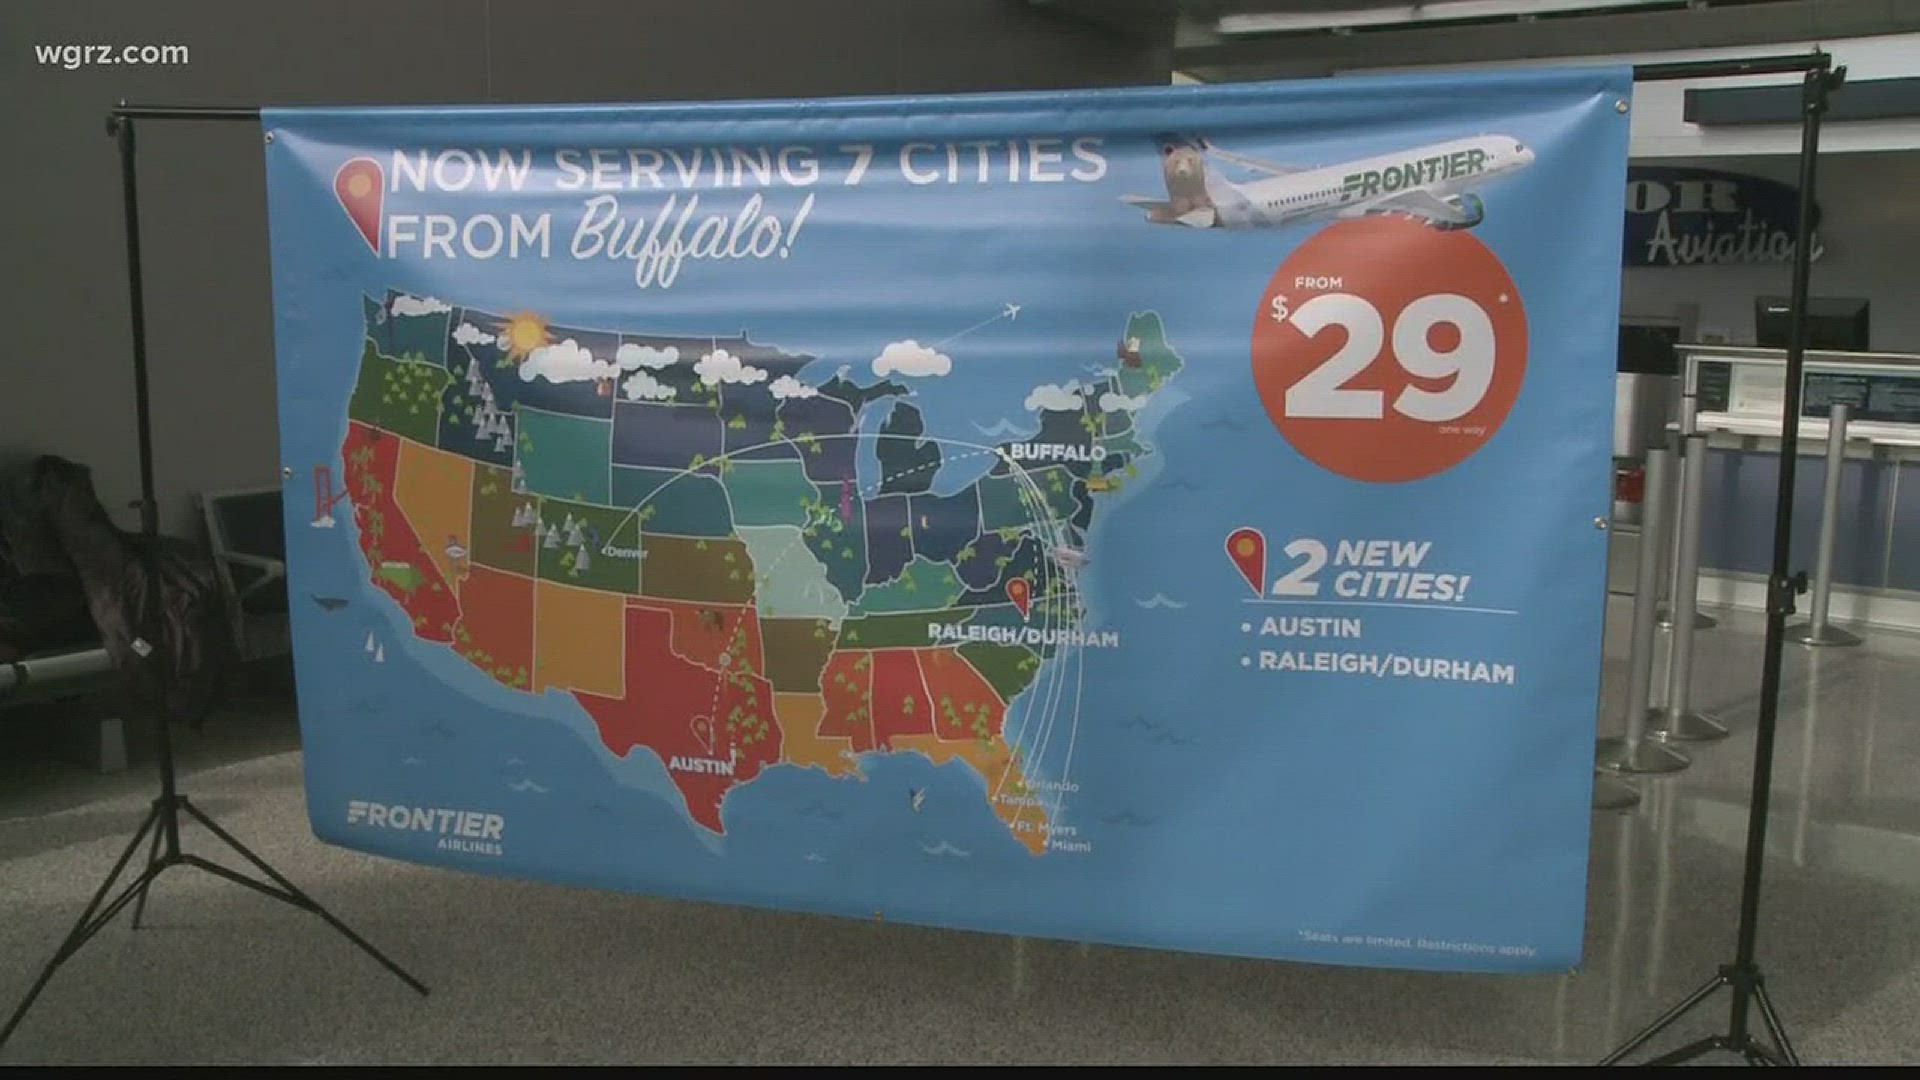 Frontier Airlines adds more routes out of Buffalo